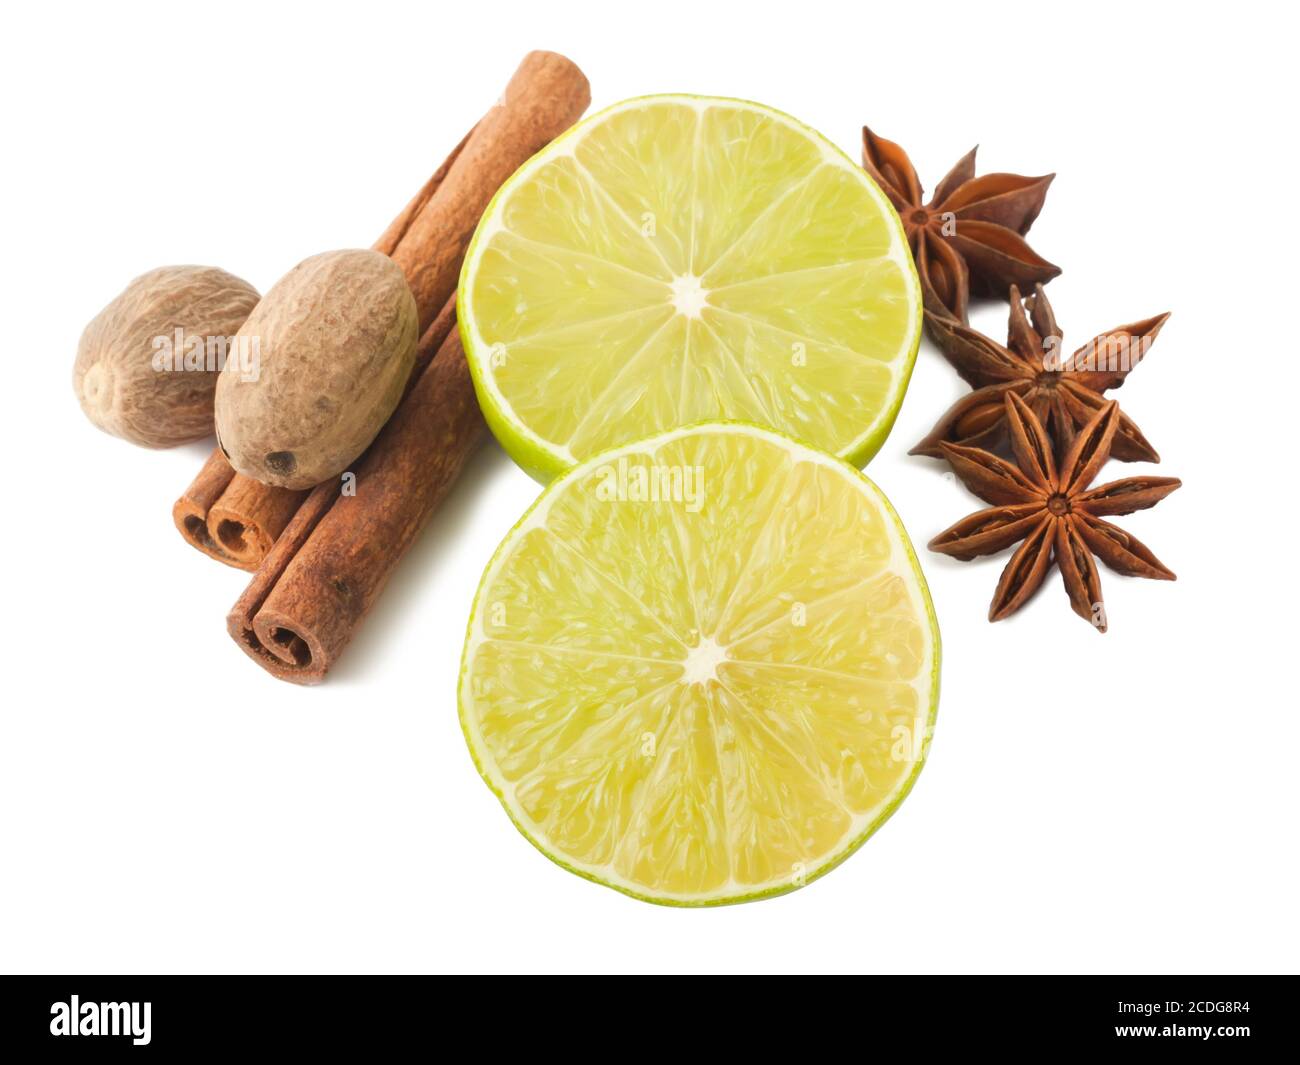 Lime, cinnamon, anis and nutmegs Stock Photo